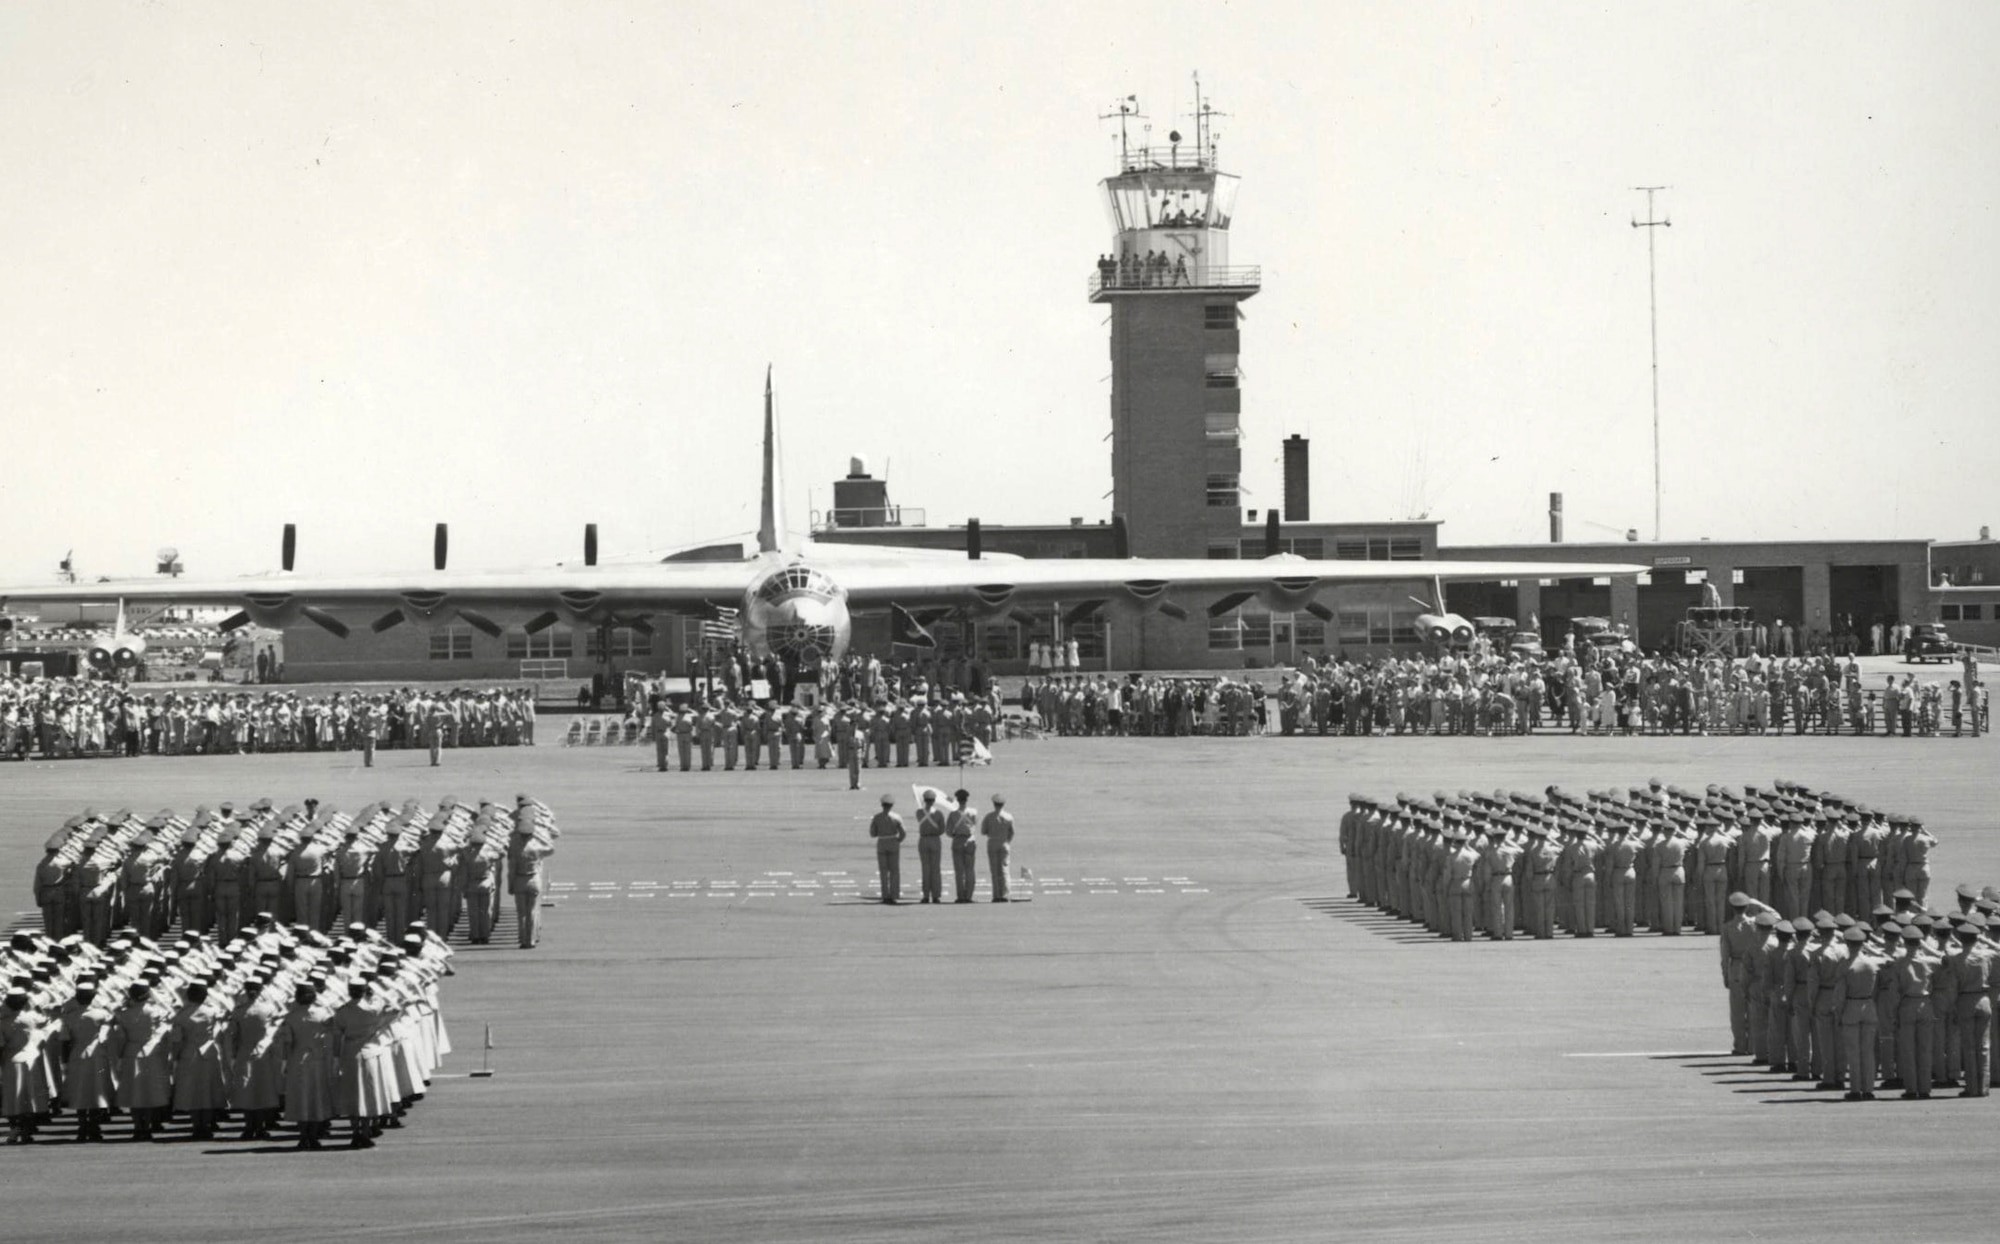 A mass formation of troops presents a final salute in tribute to Brig. Gen. Richard E. Ellsworth during a ceremony renaming the base in their late wing commander’s honor June 13, 1953. (Courtesy photo from South Dakota Air and Space Museum)